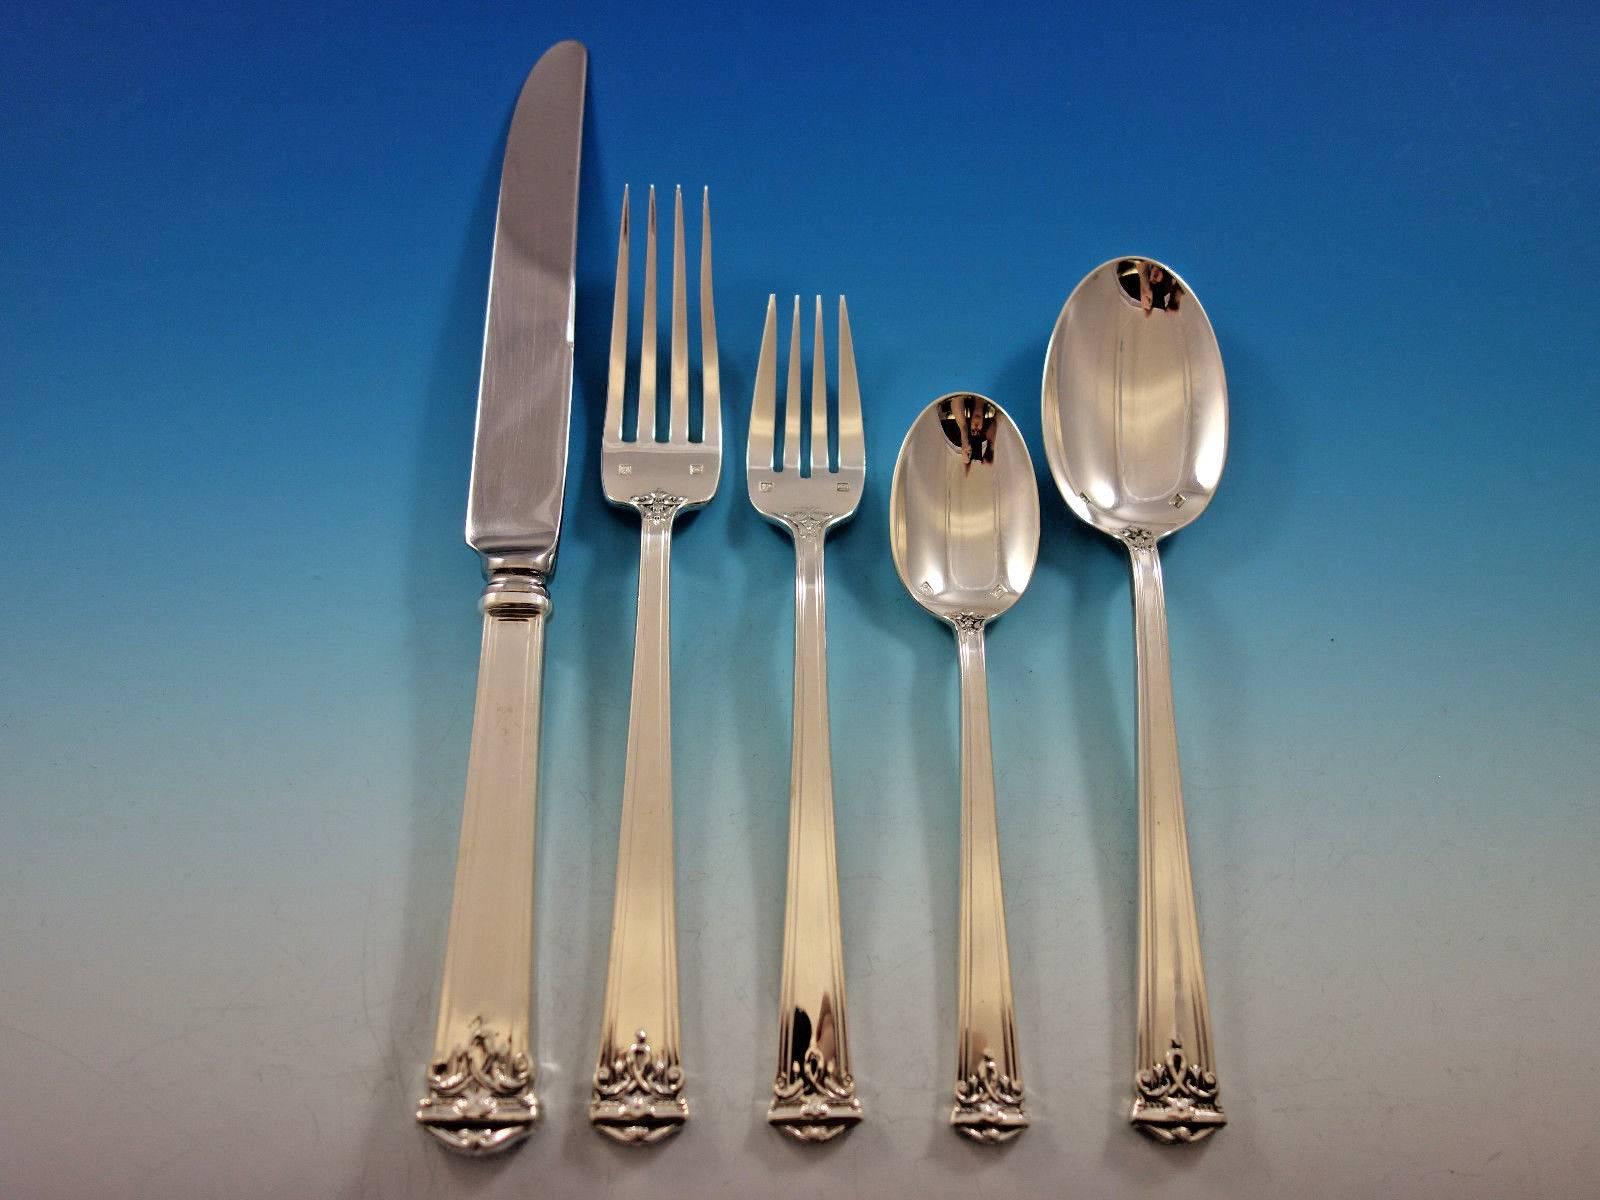 Large and heavy Trianon by Tuttle sterling silver flatware set for 18-90 pieces. This set includes: 16 dinner size knives, 9 3/4", 16 dinner size forks, 7 7/8", 16 salad forks, 7", 16 teaspoons, 5 7/8", 16 place soup spoons, 7